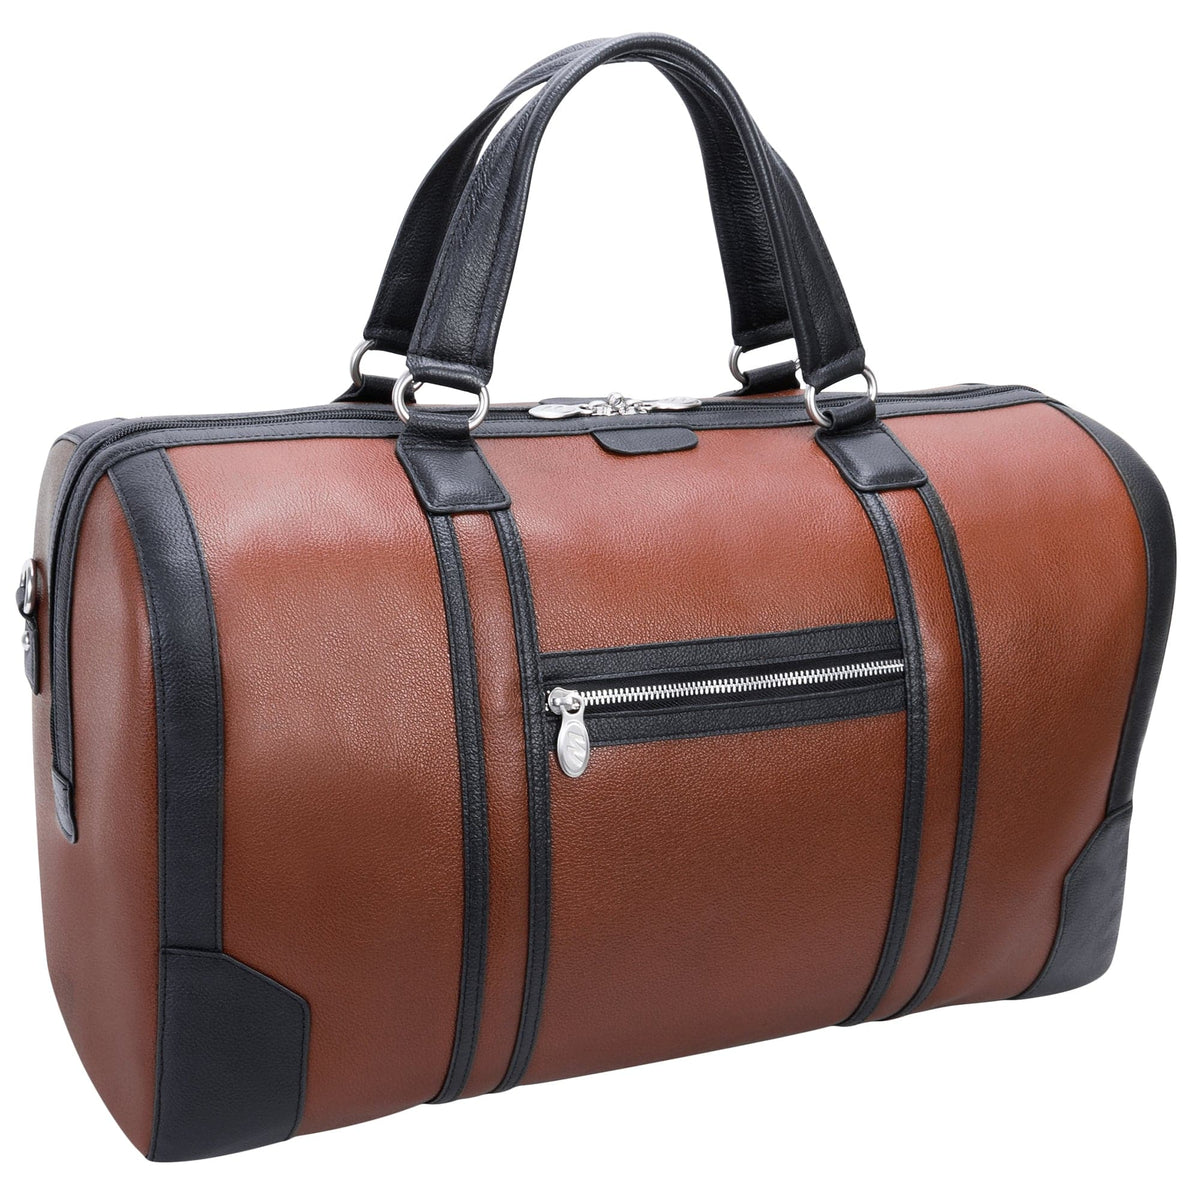 McKlein U Series Kinzie 20" Two-Tone Tablet Carry-All Leather Duffel Bag